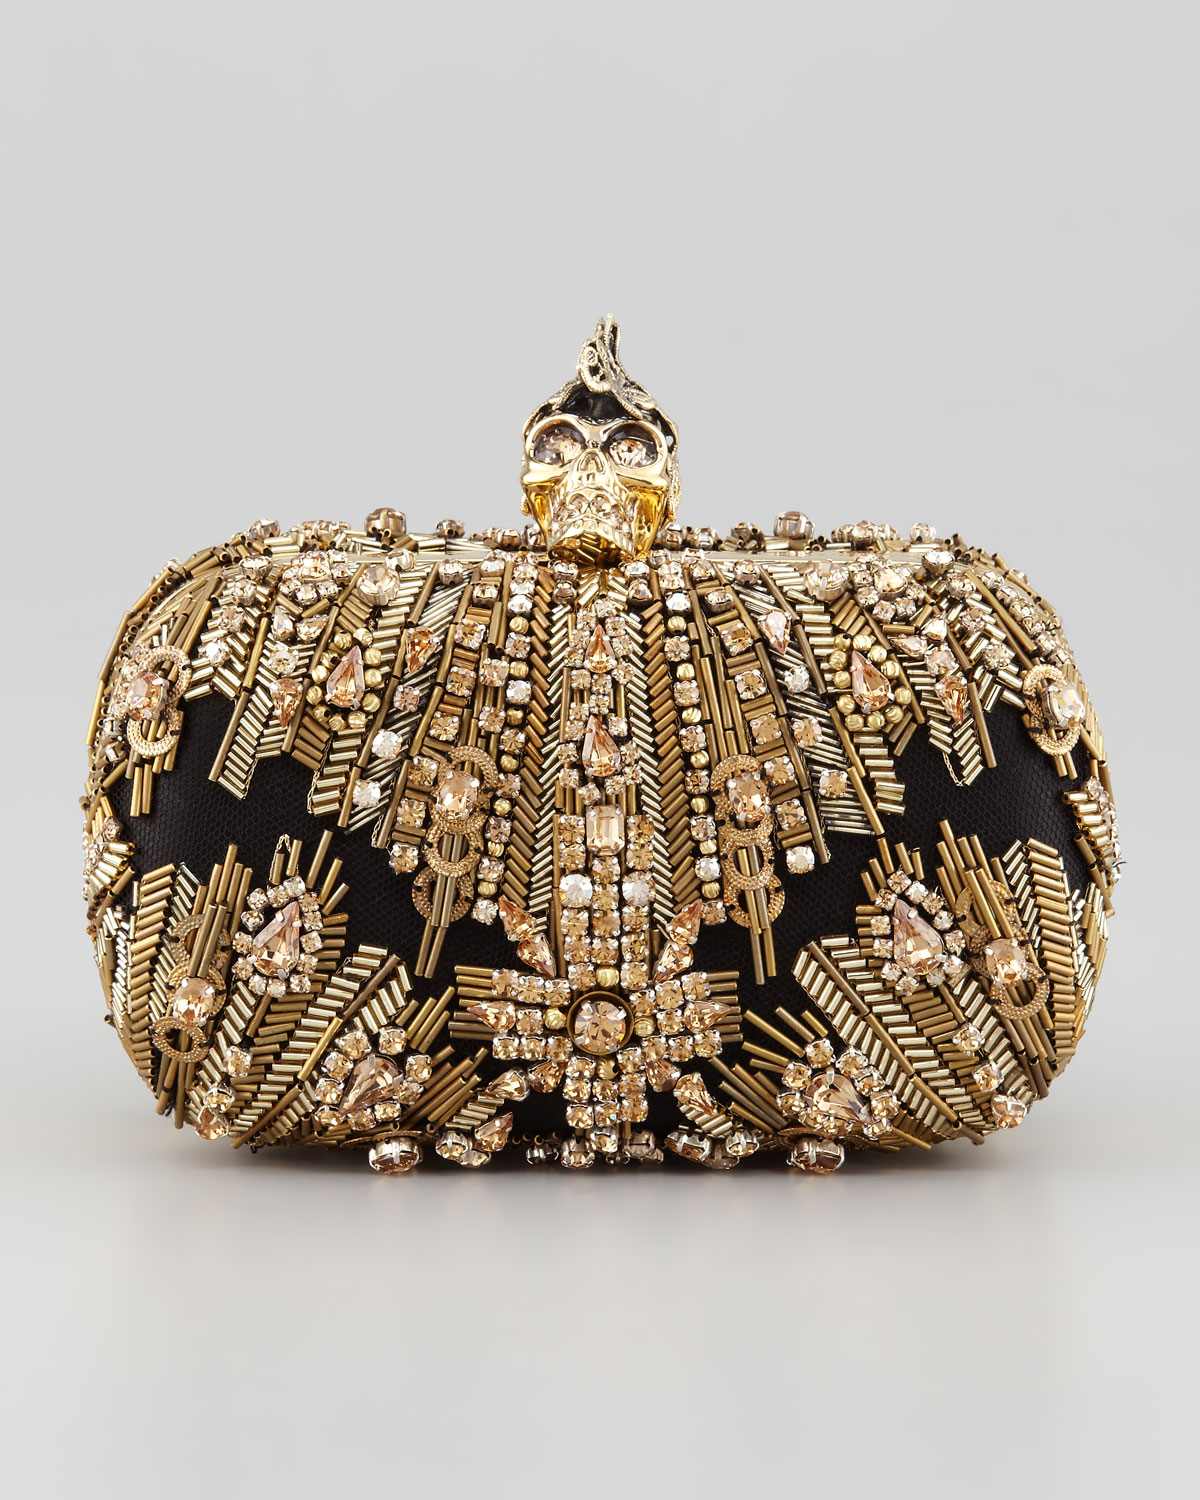 Lyst - Alexander Mcqueen Crystalembroidered Punk Skull Clutch Bag Gold ...